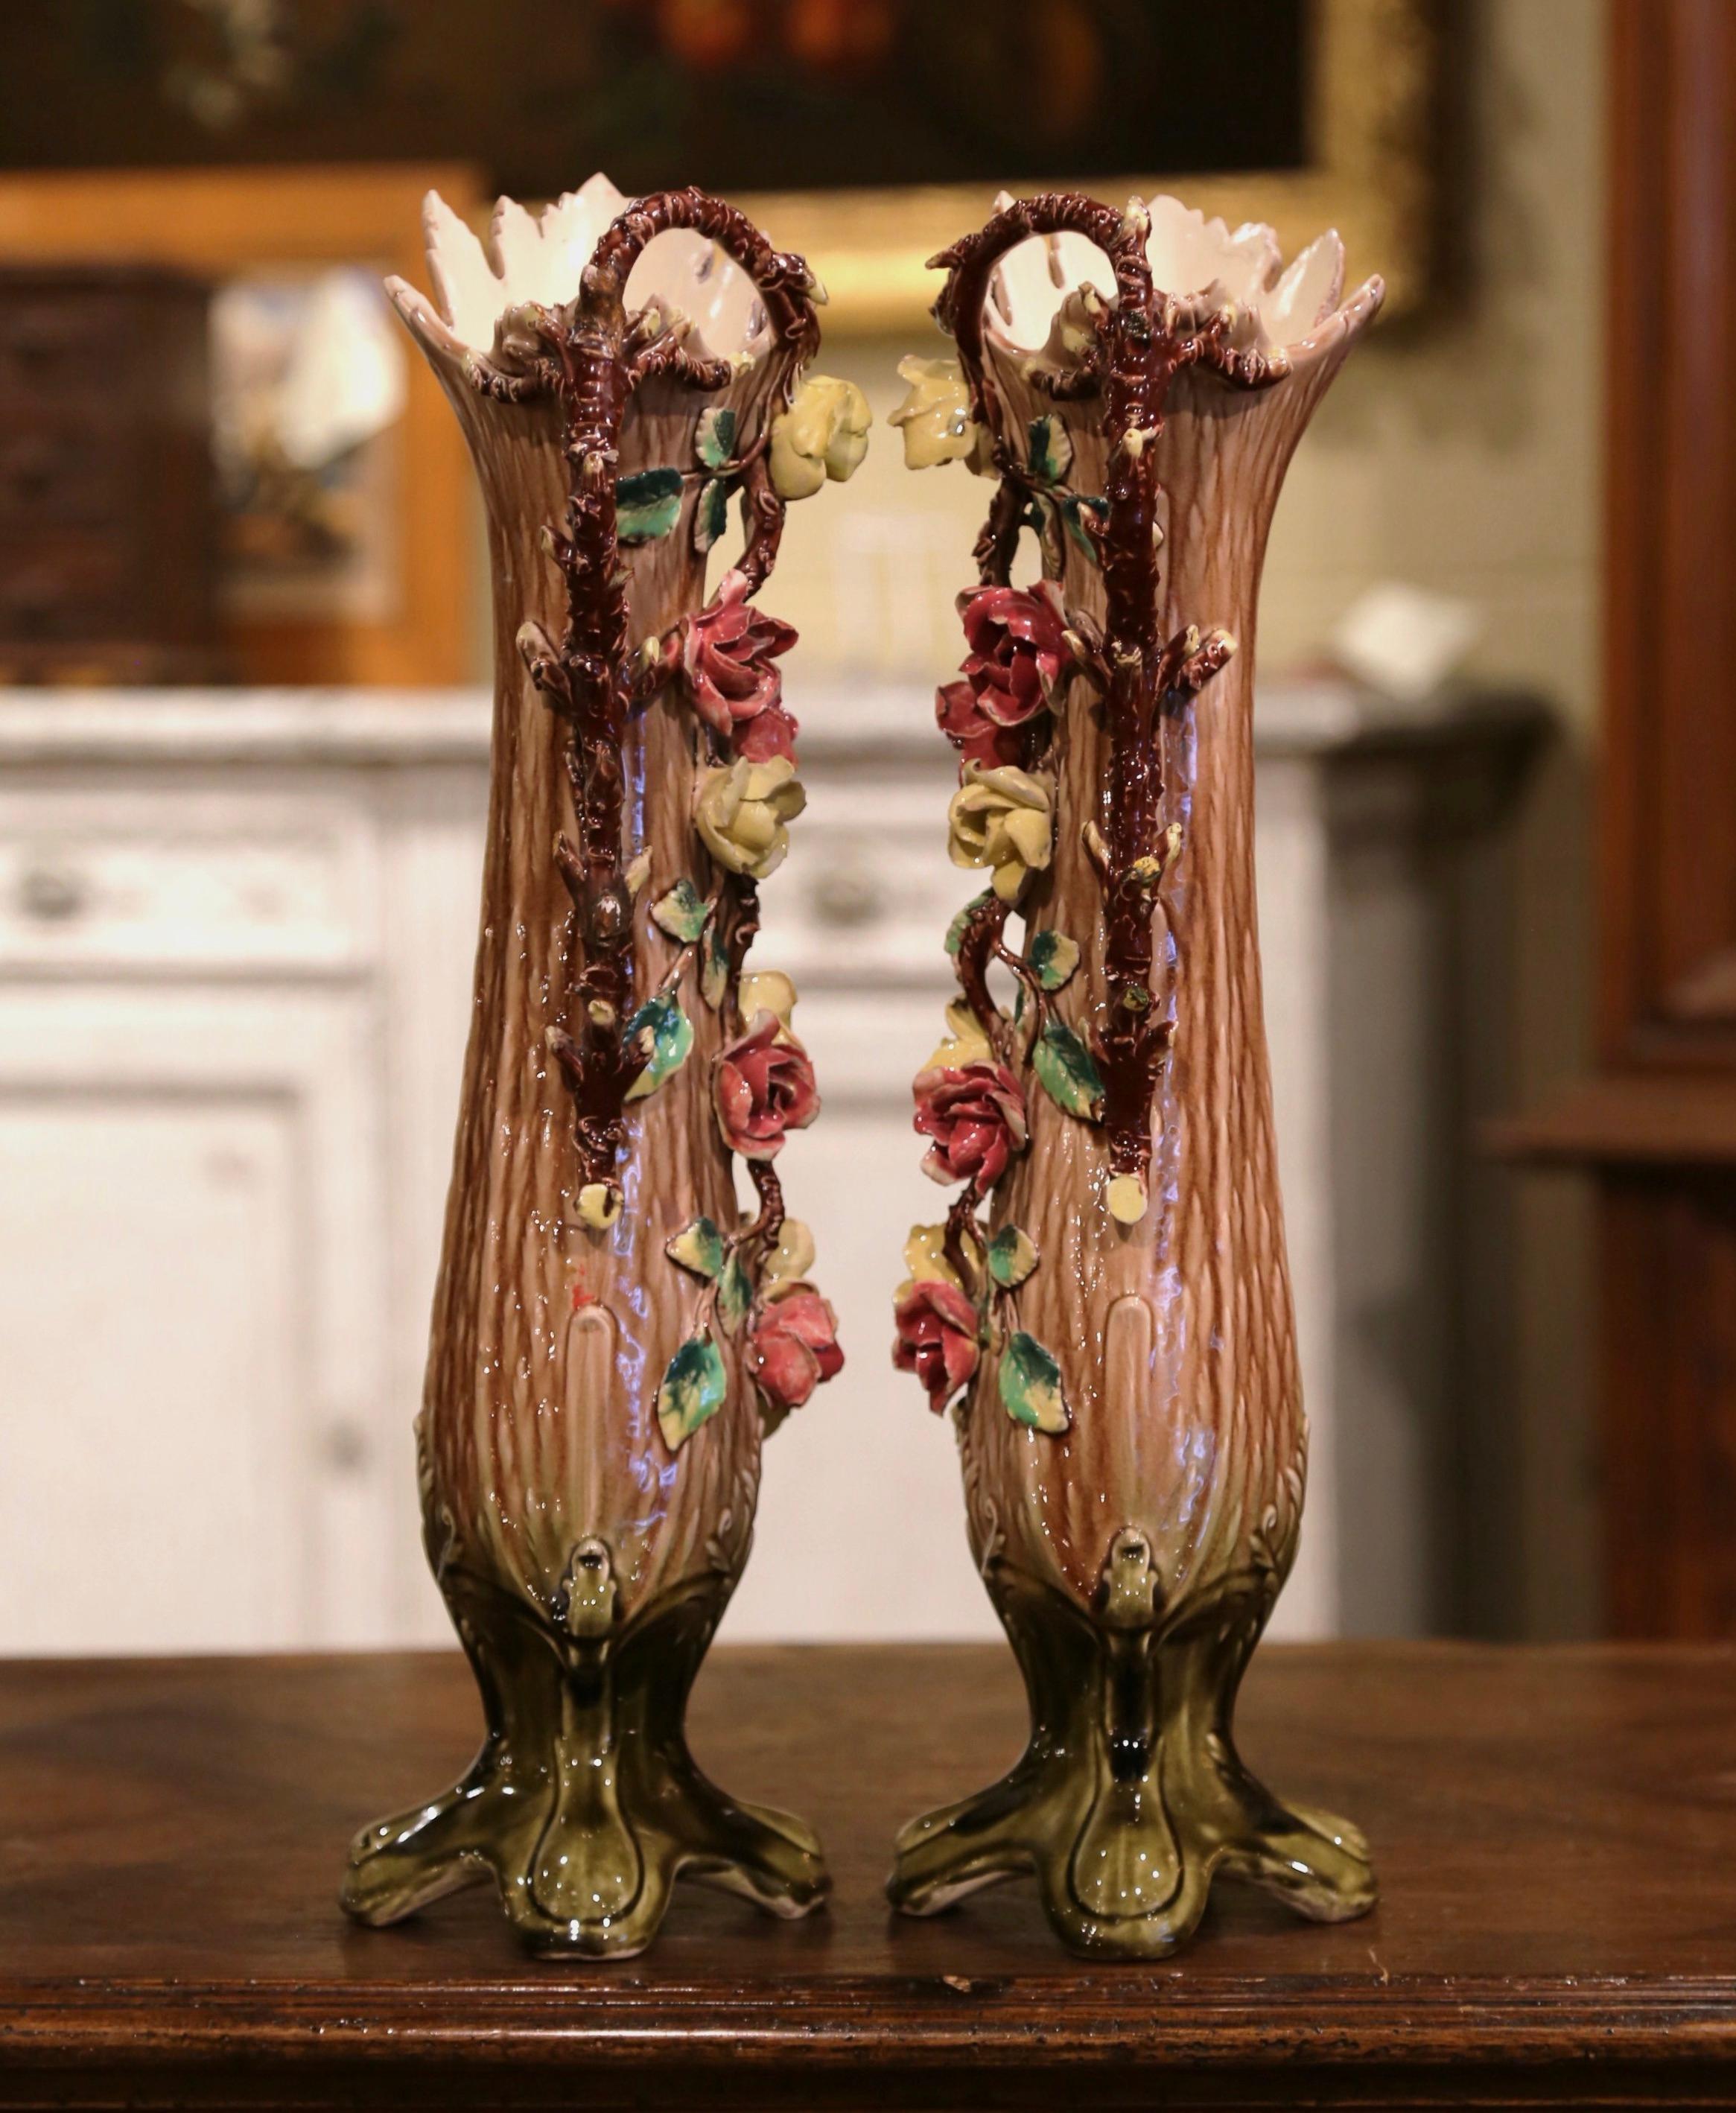 Pair of 19th Century French Painted Ceramic Barbotine Vases with Floral Decor For Sale 5